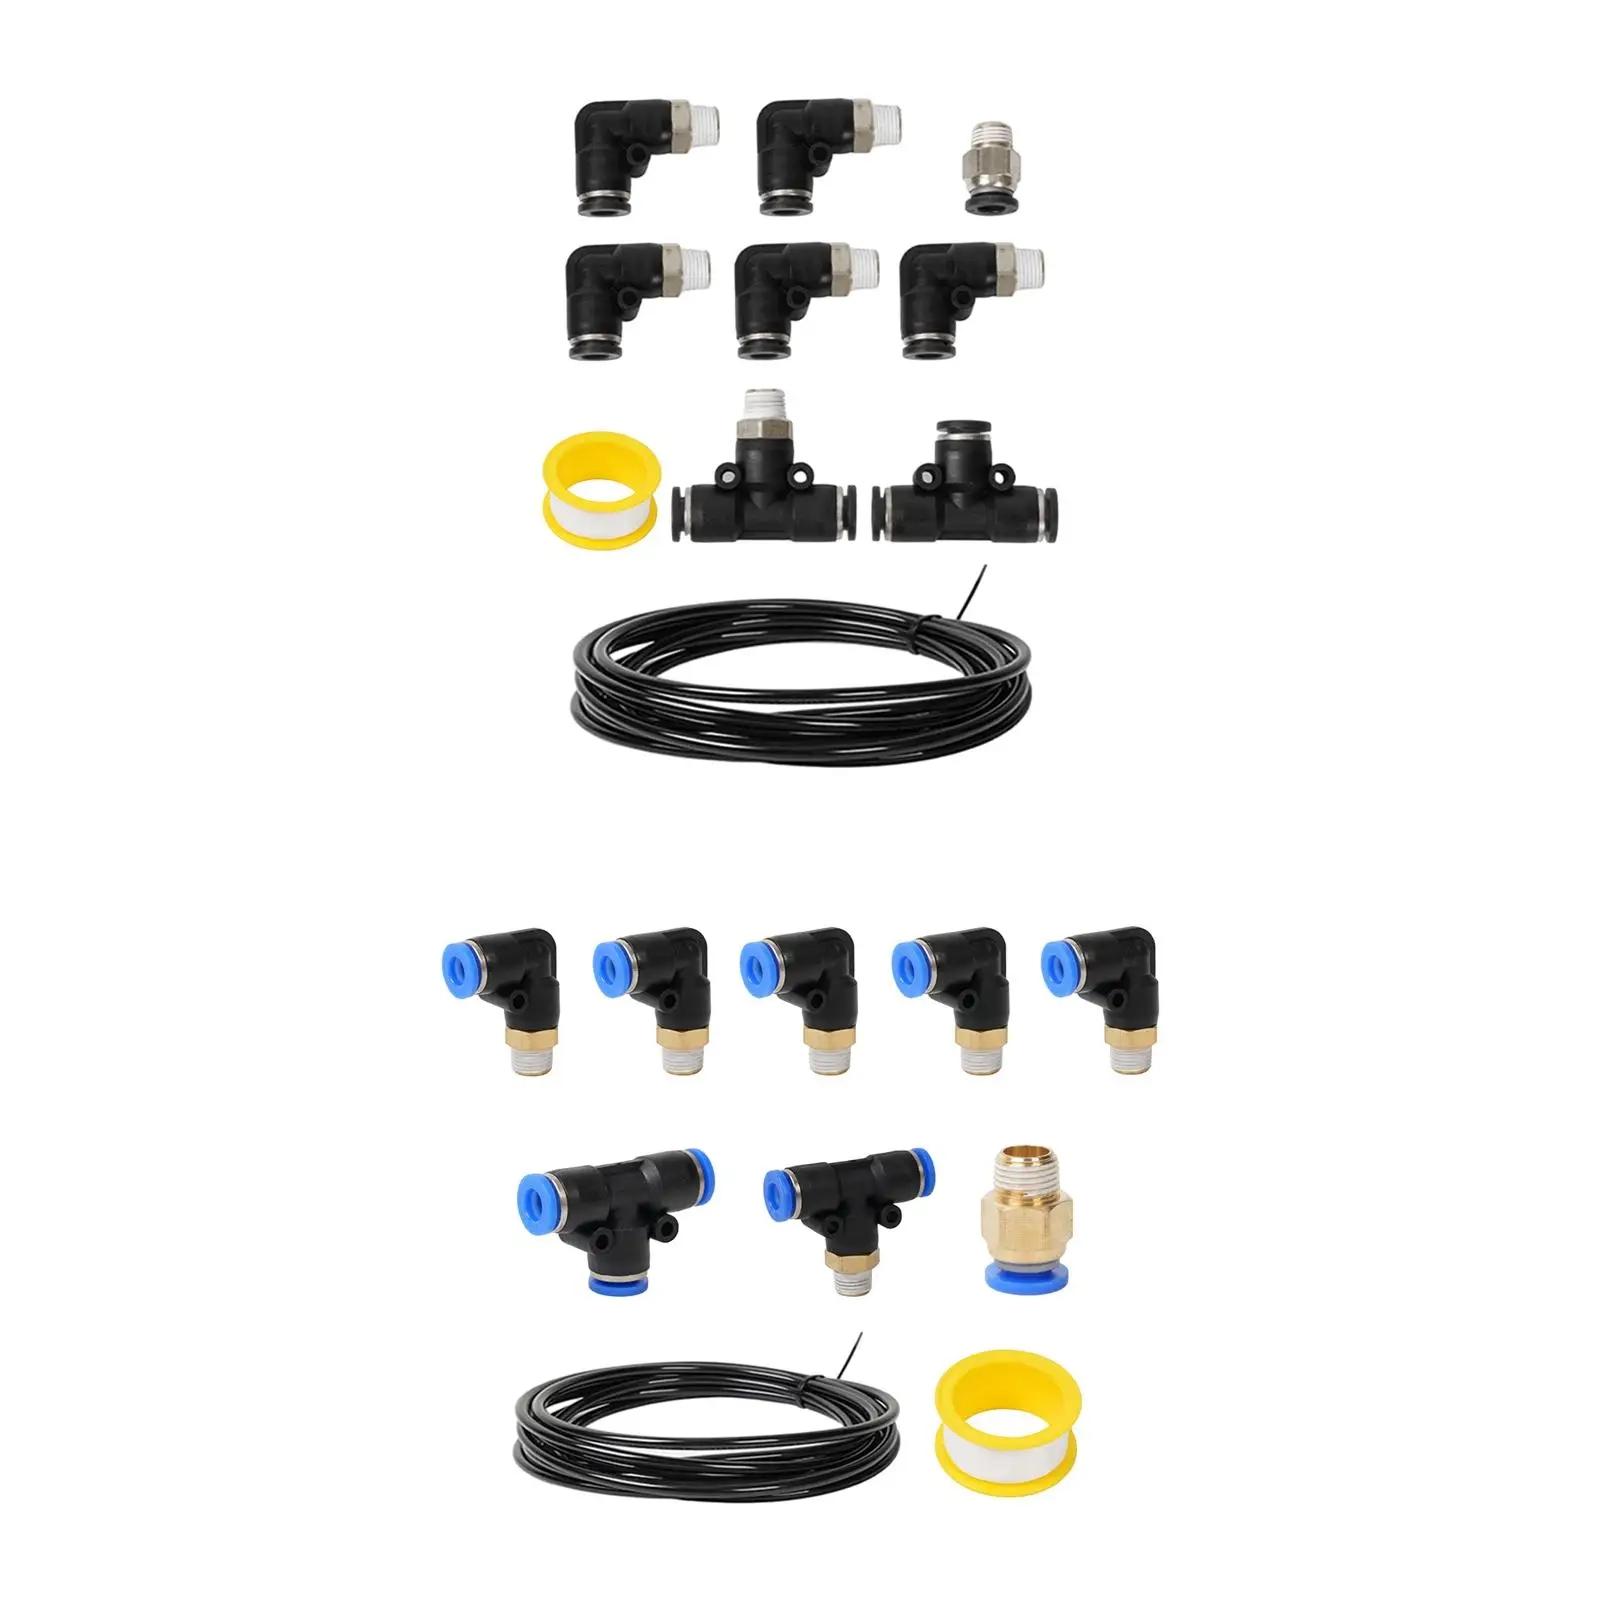 Wastegate Solenoid Connector Set Plug and Play Vacuum Fitting Kit for Vehicles Vehicle Spare Parts Easily Install Durable